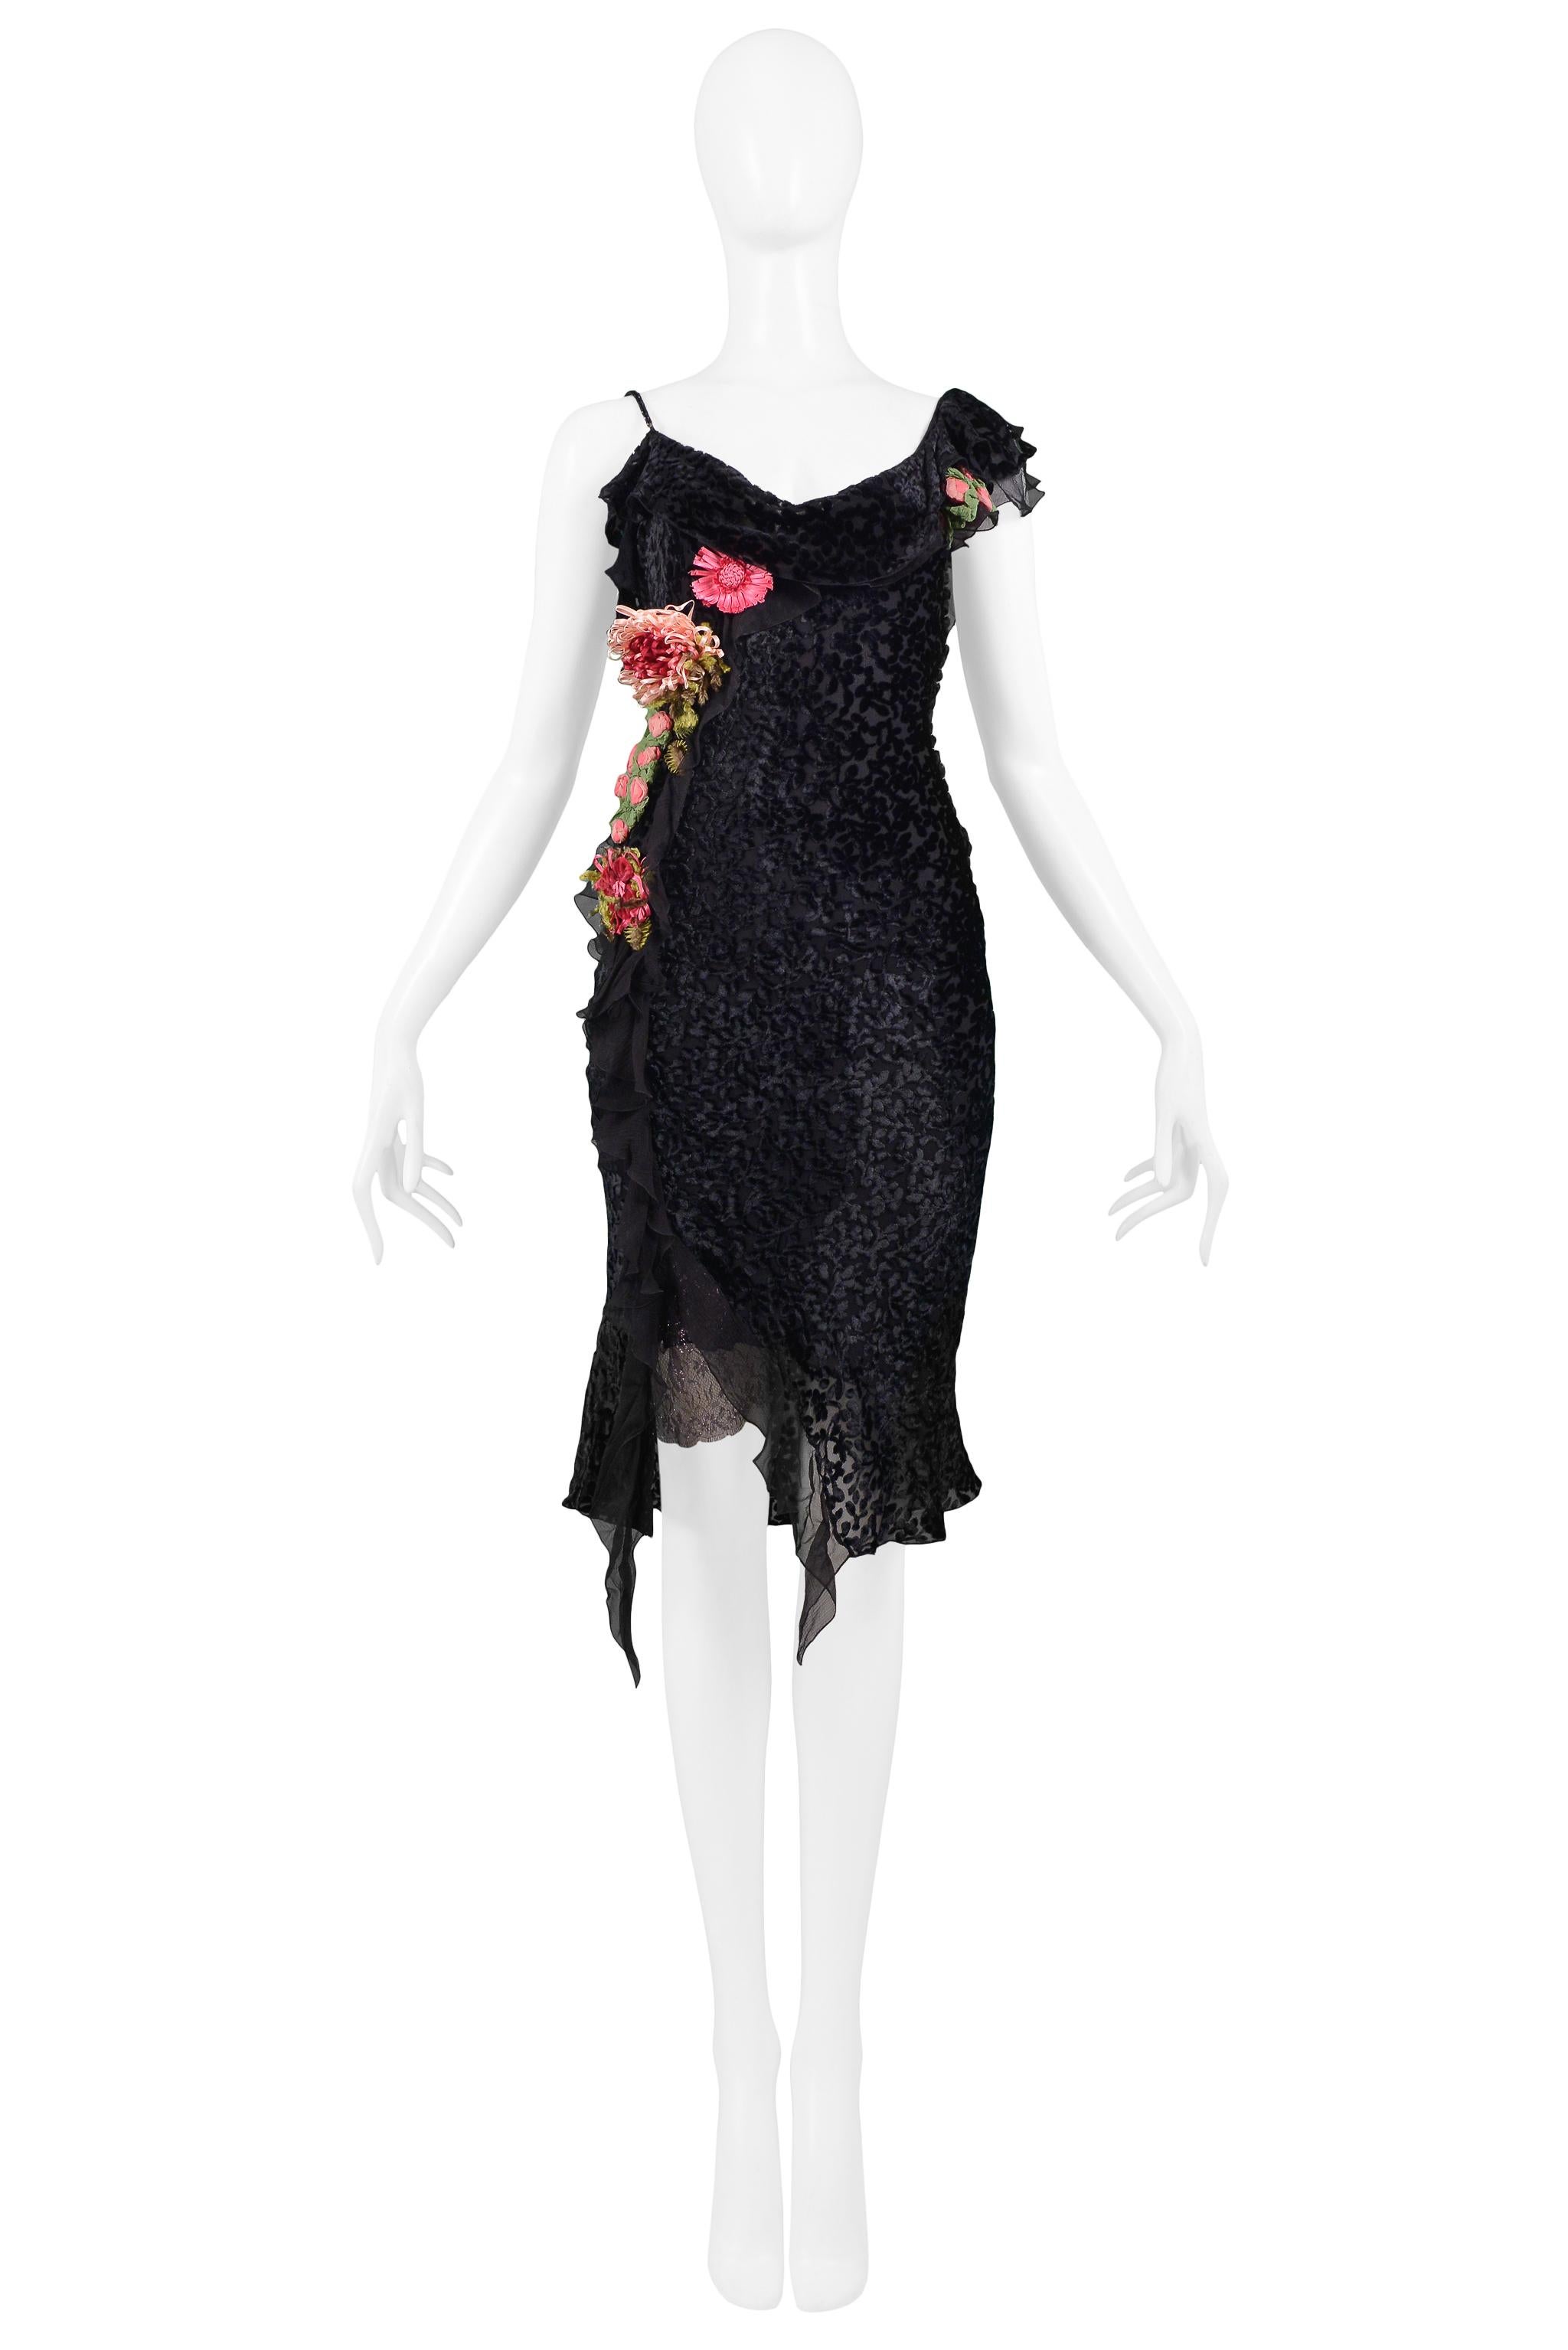 Resurrection Vintage is excited to offer a vintage Christian Dior black Devore velvet bias-cut dress featuring a draped neckline, spaghetti straps, pink and green raffia flowers at the waist, cocktail length, and asymmetrical ruffle accents at